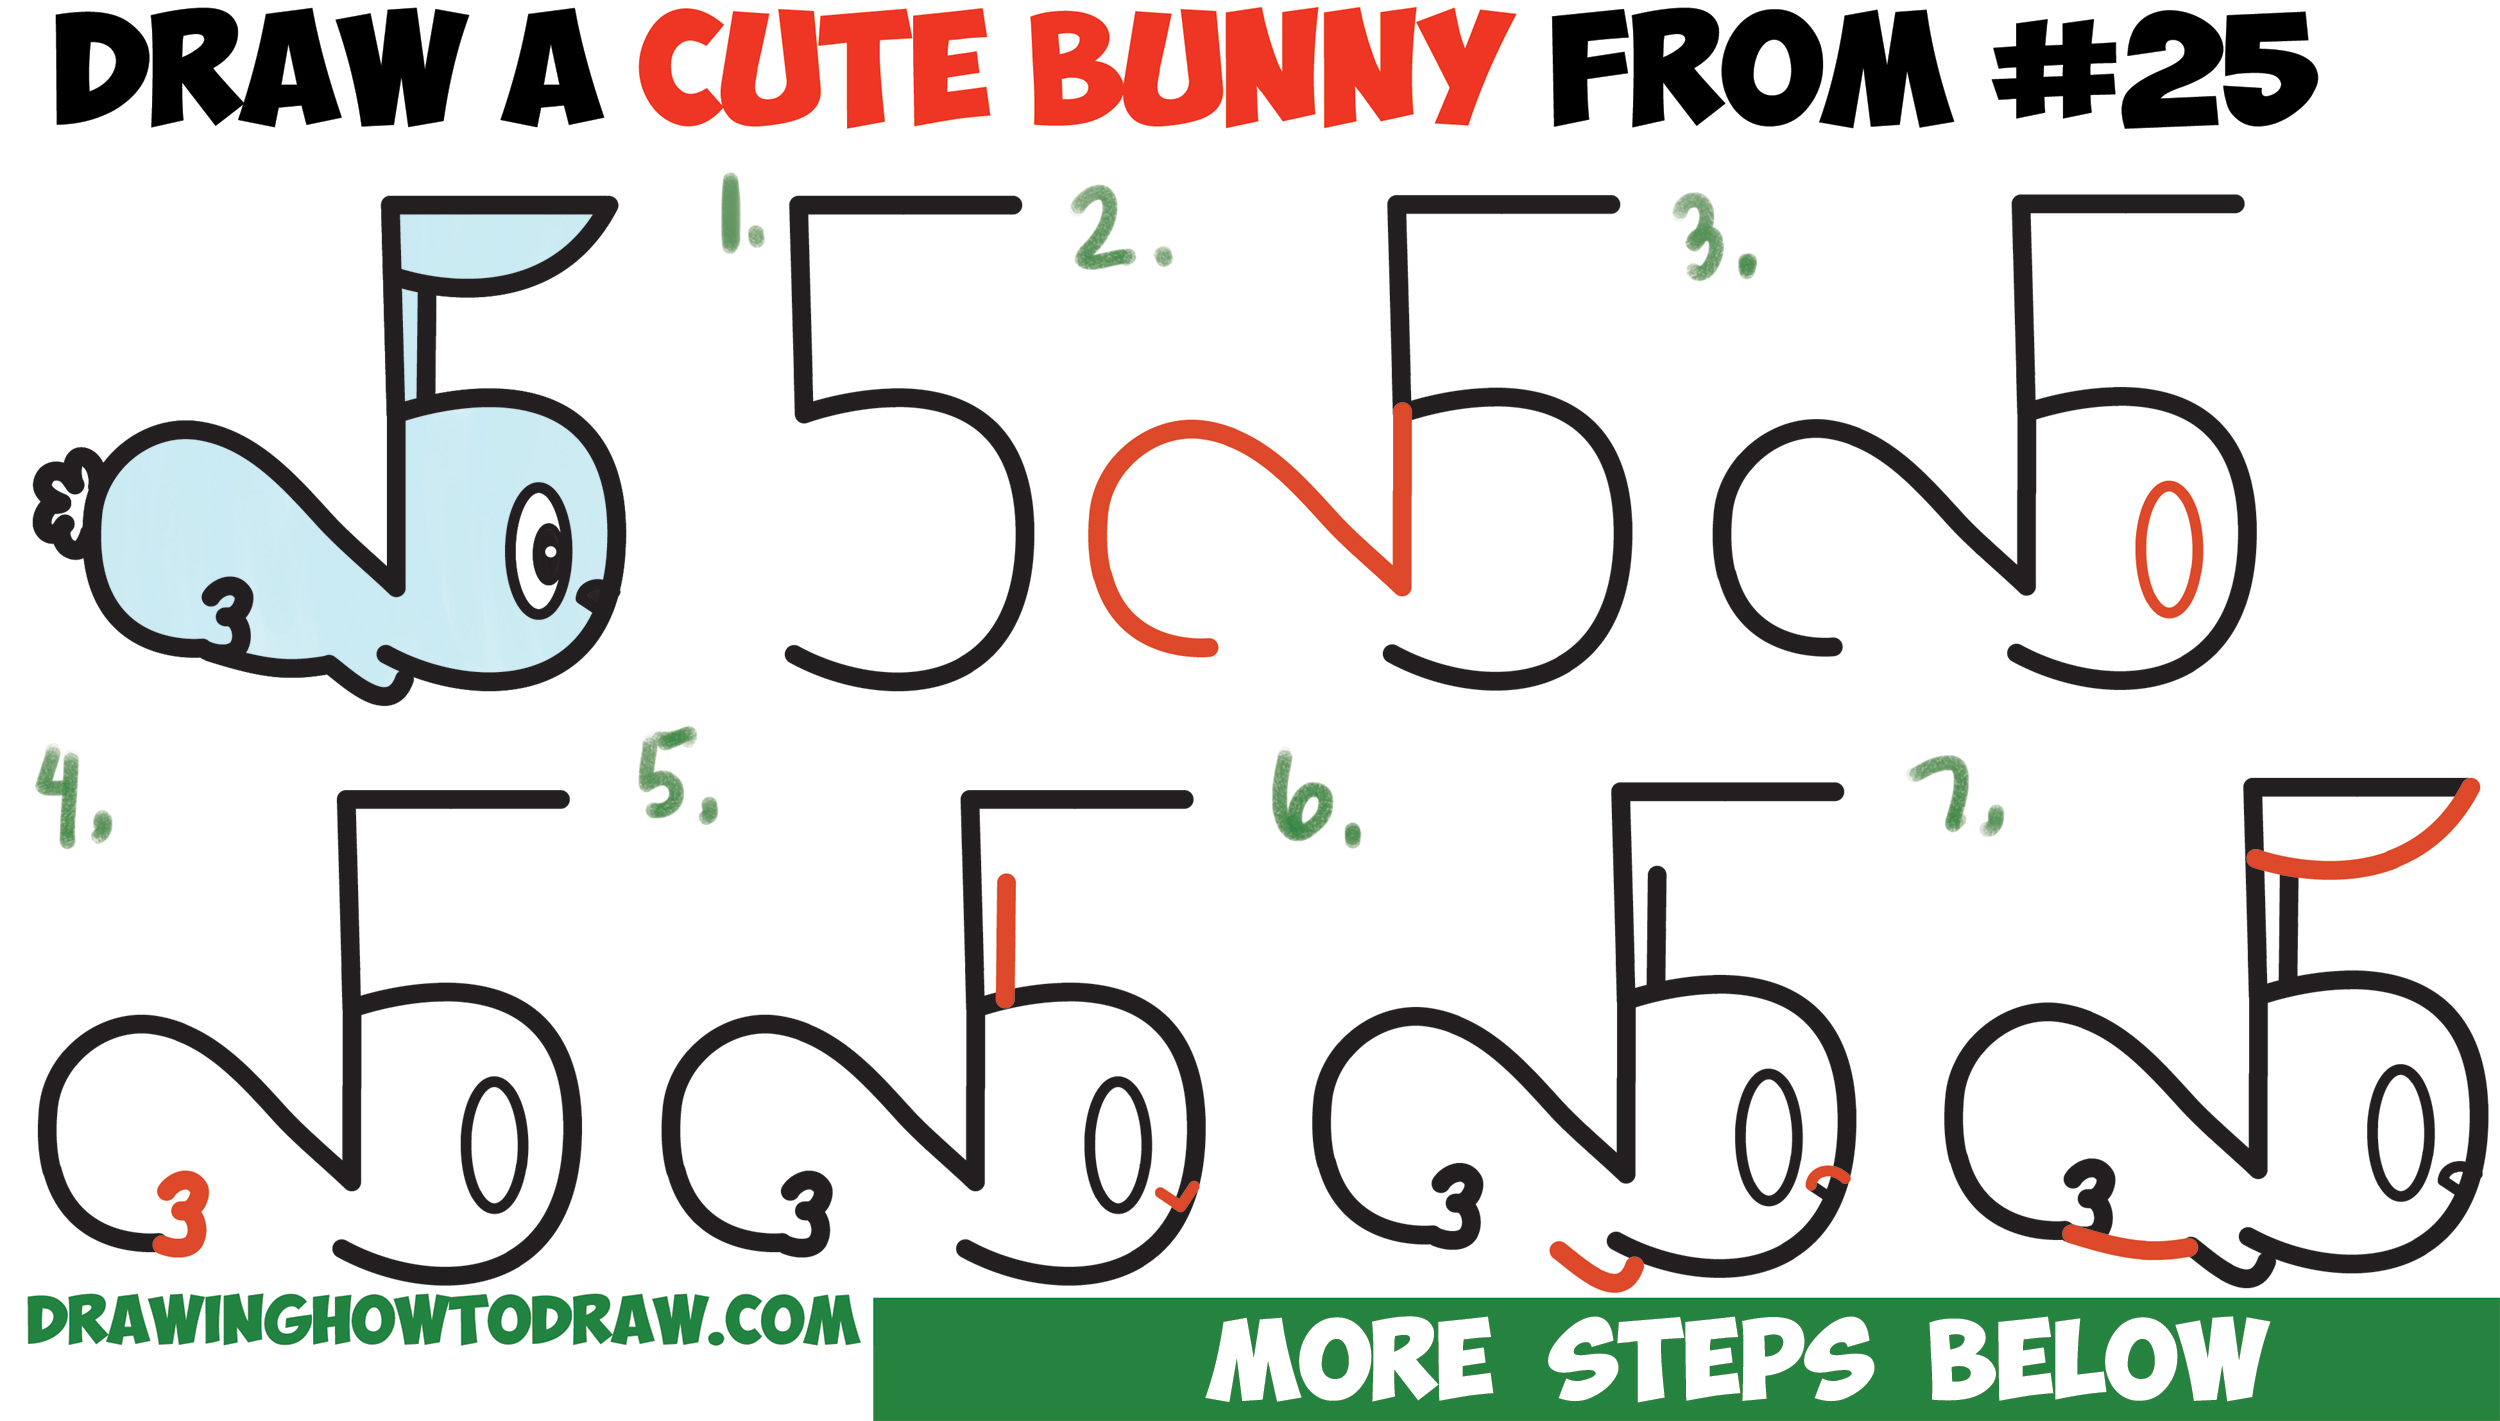 How to Draw a Cute Cartoon Bunny Rabbit from Numbers 25 Easy Step by Step Drawing Tutorial for Kids